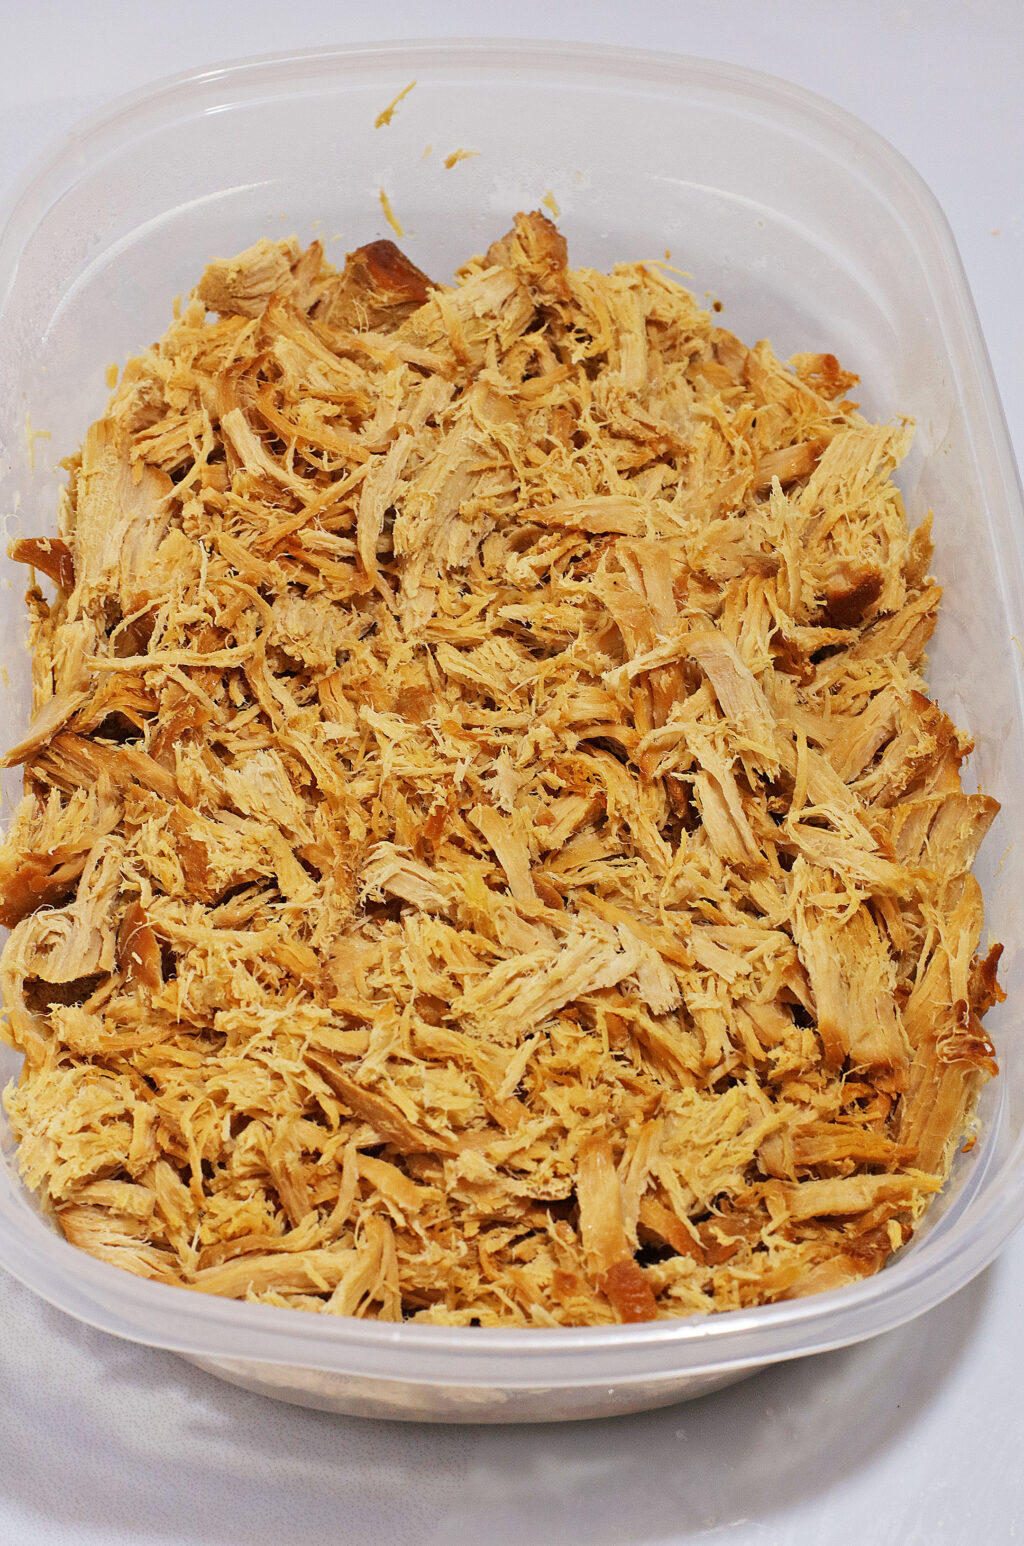 shredded pulled pork in container